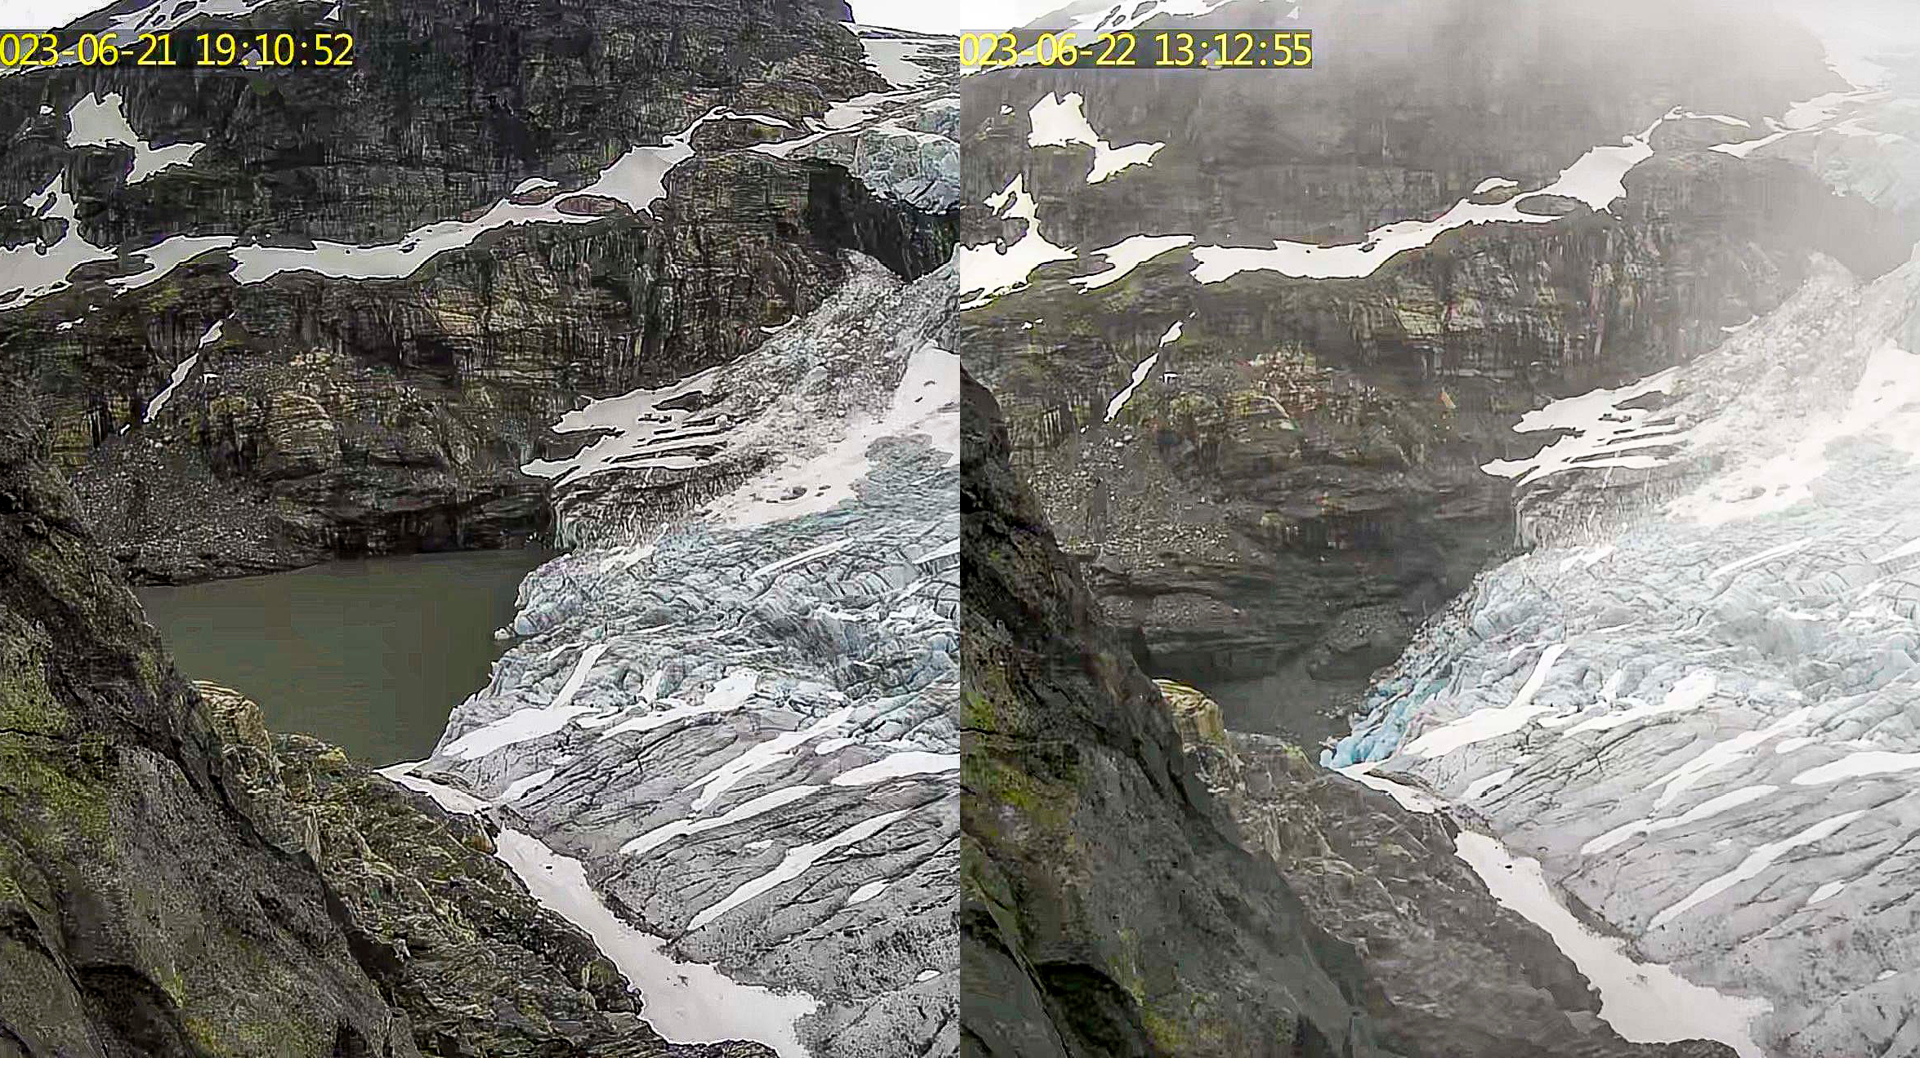 A group of researchers wants to help communities living close to melting glaciers. Photos from a webcamera shows quick and early discharge.